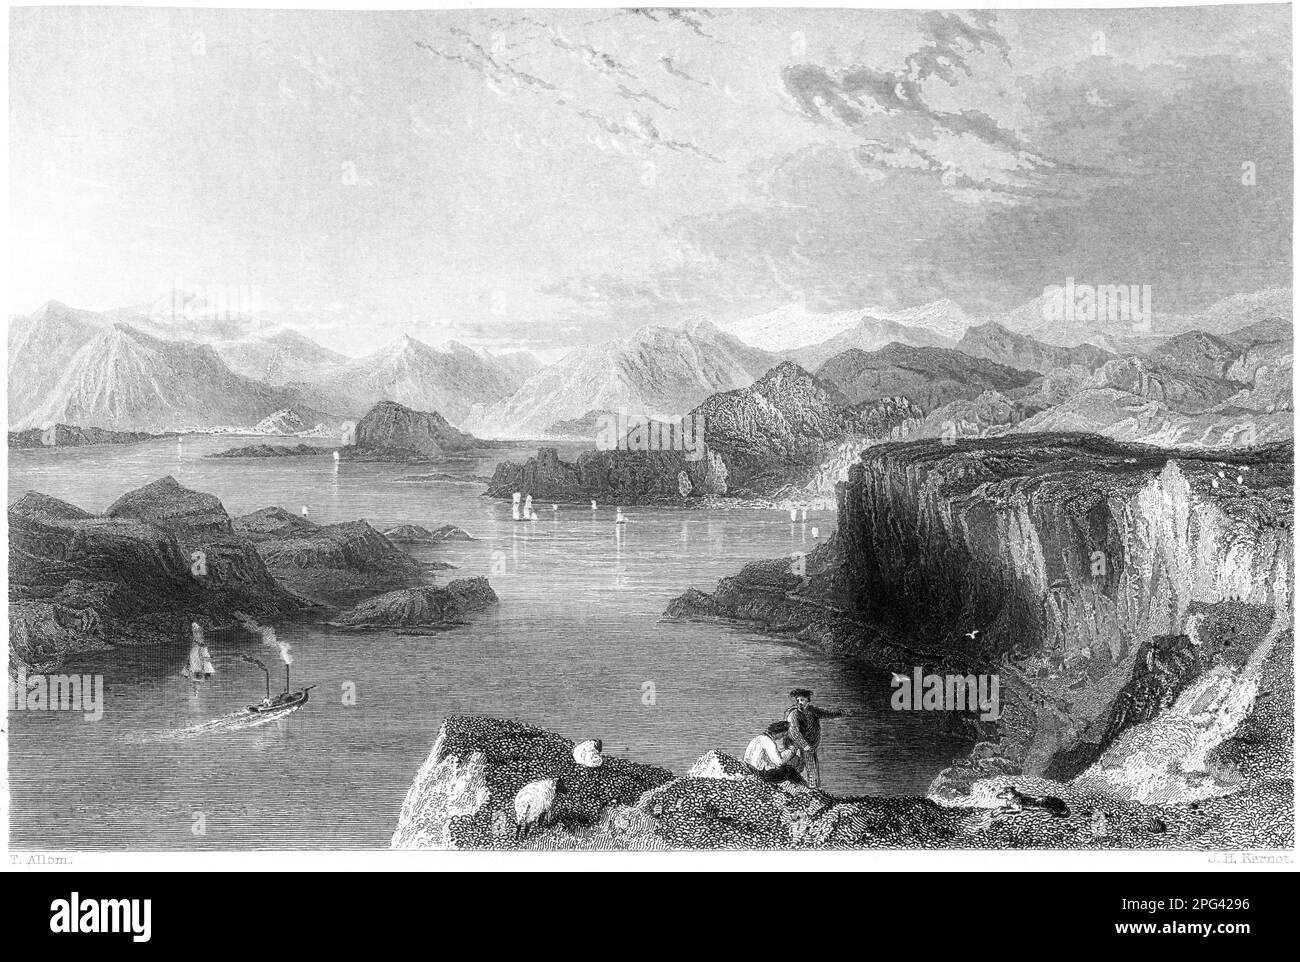 An engraving of The Sound of Kerrera, Scotland UK scanned at high resolution from a book printed in 1840. Believed copyright free. Stock Photo